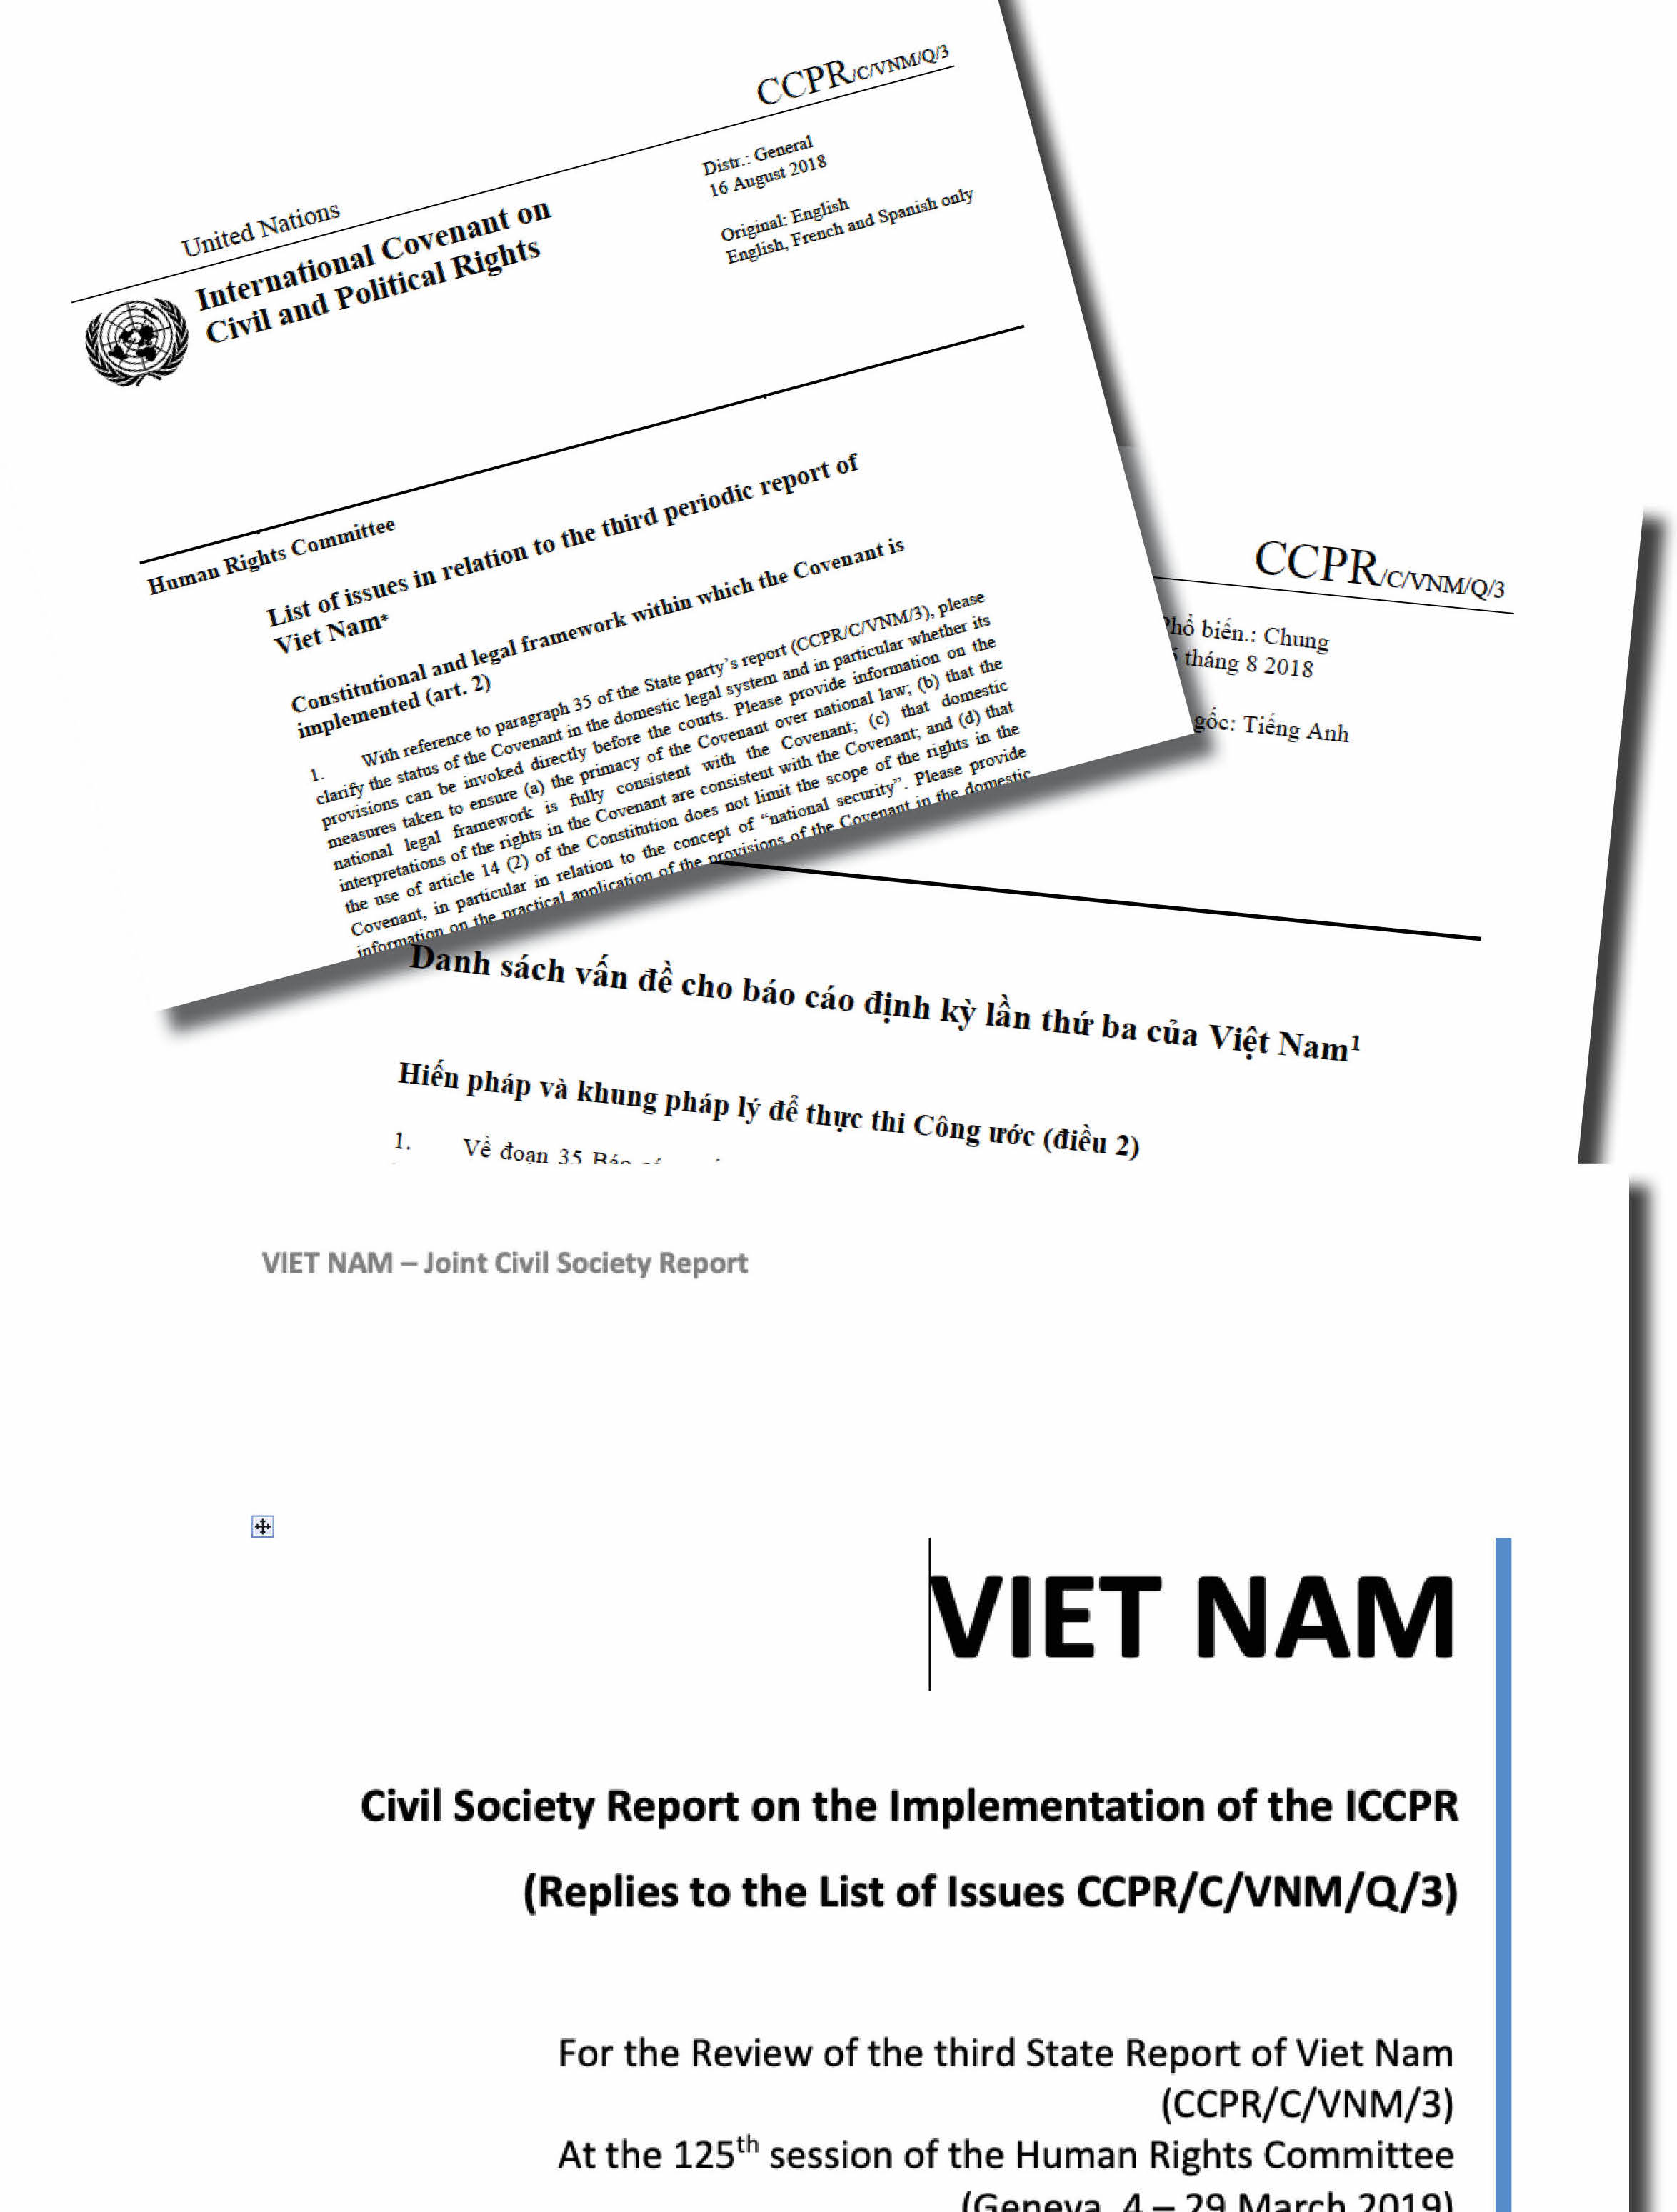 Preparing for the 3rd review of Viet Nam after 17 years